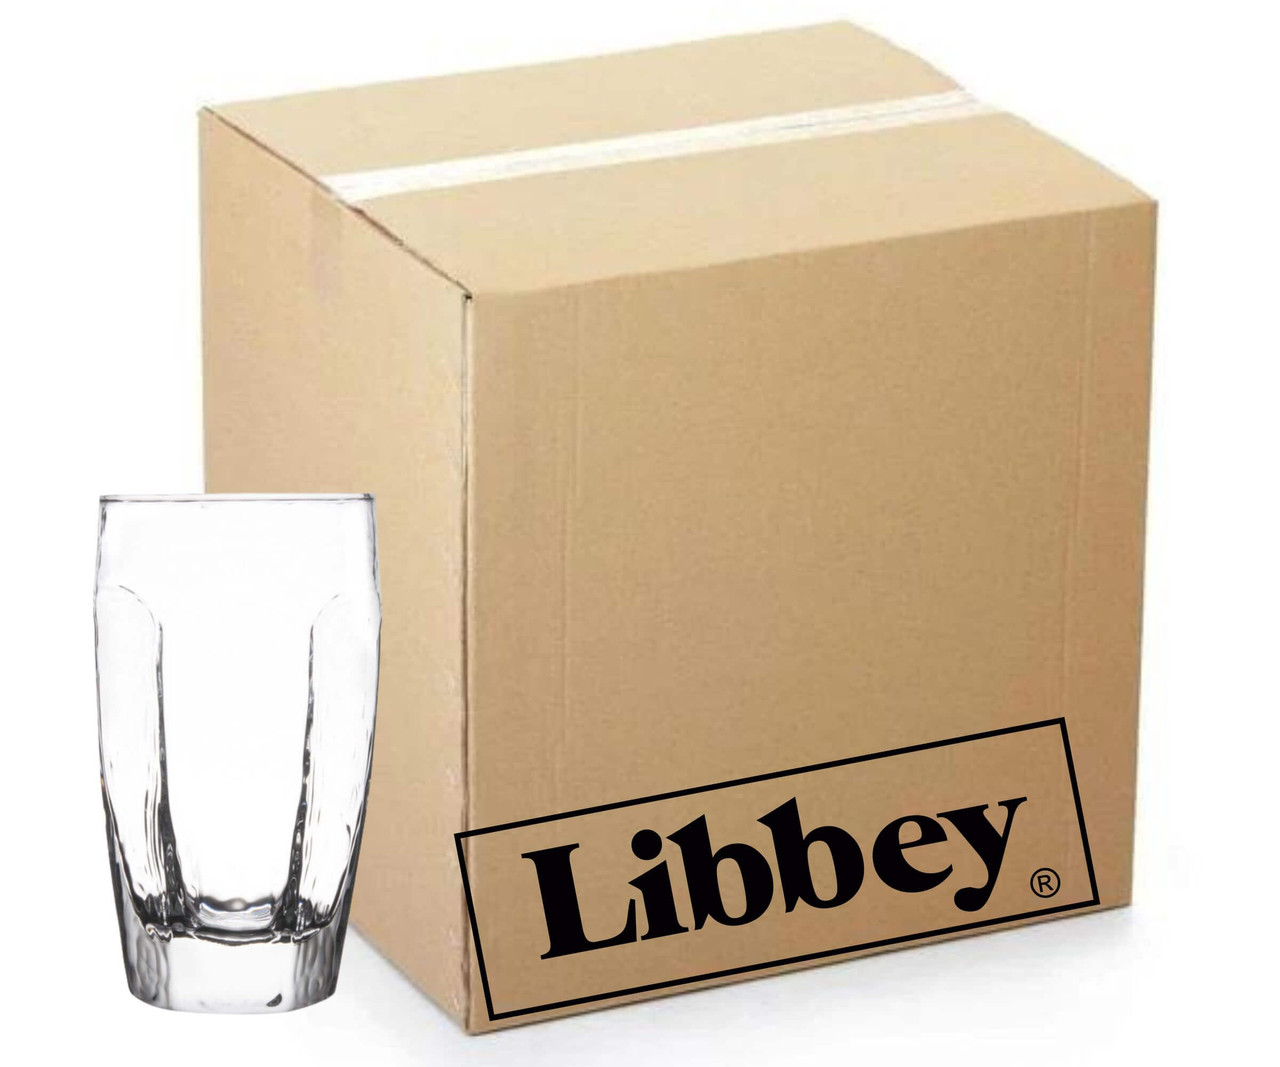 Libbey Chivalry Set of 36 Chip-Resistant Beverage Glasses - 12 oz.-Chicken Pieces